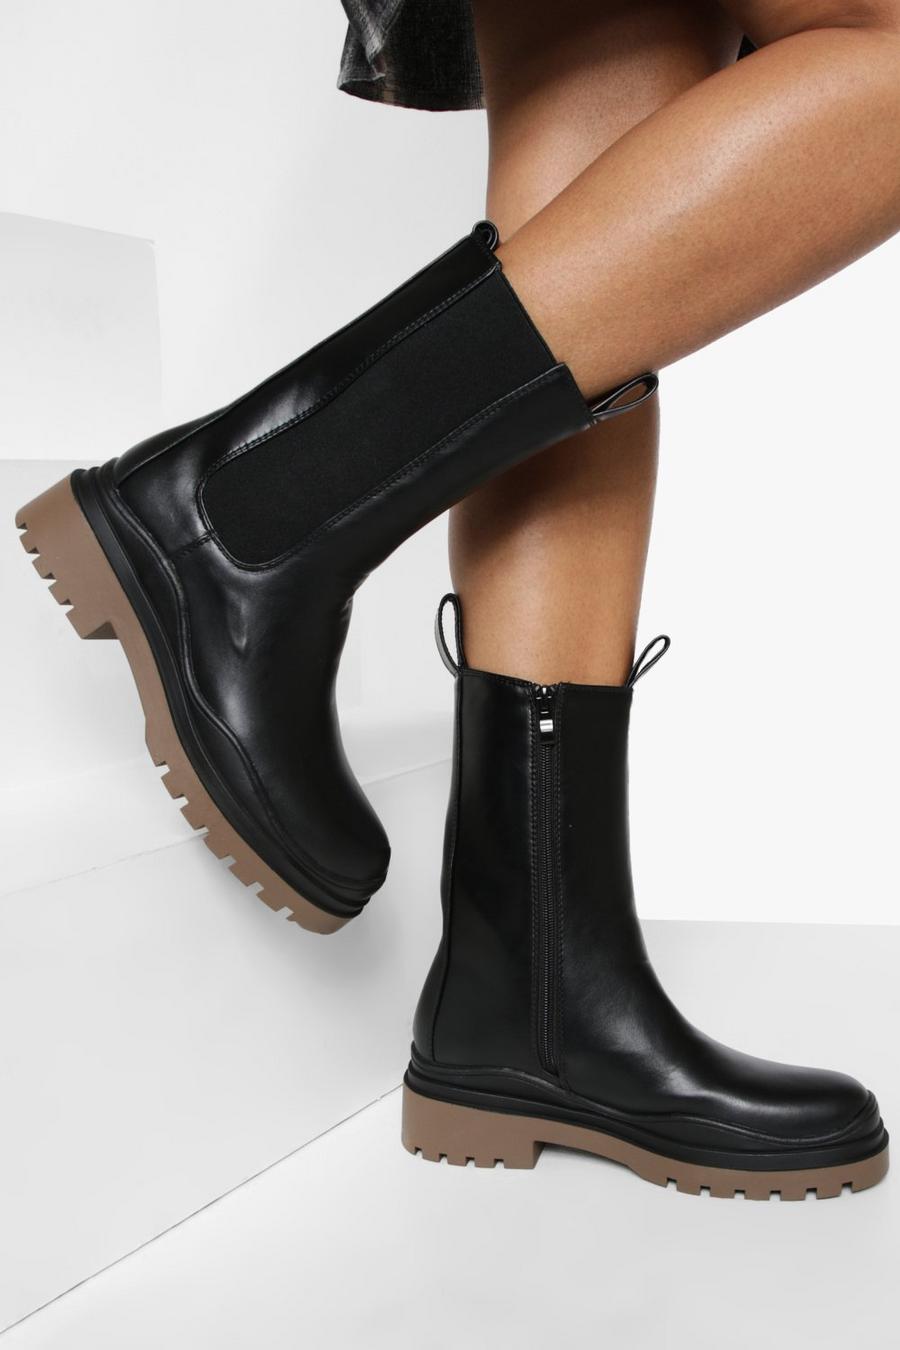 Black nero Contrast Sole Calf Height Chelsea Boots